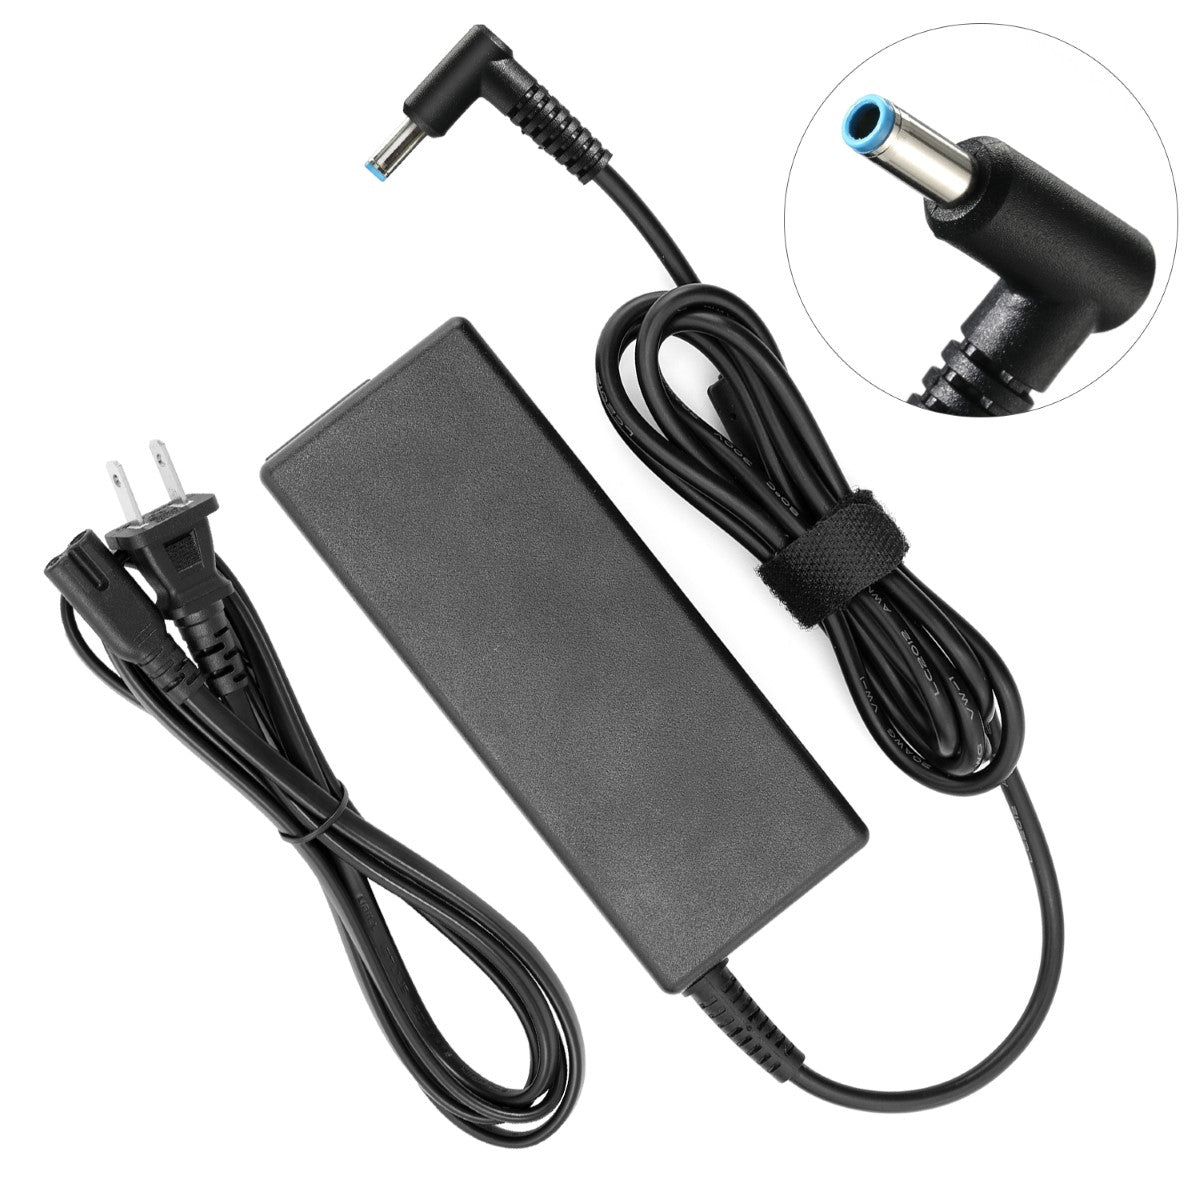 AC Adapter Charger for HP Pavilion Touchsmart 17-f023ds Notebook.